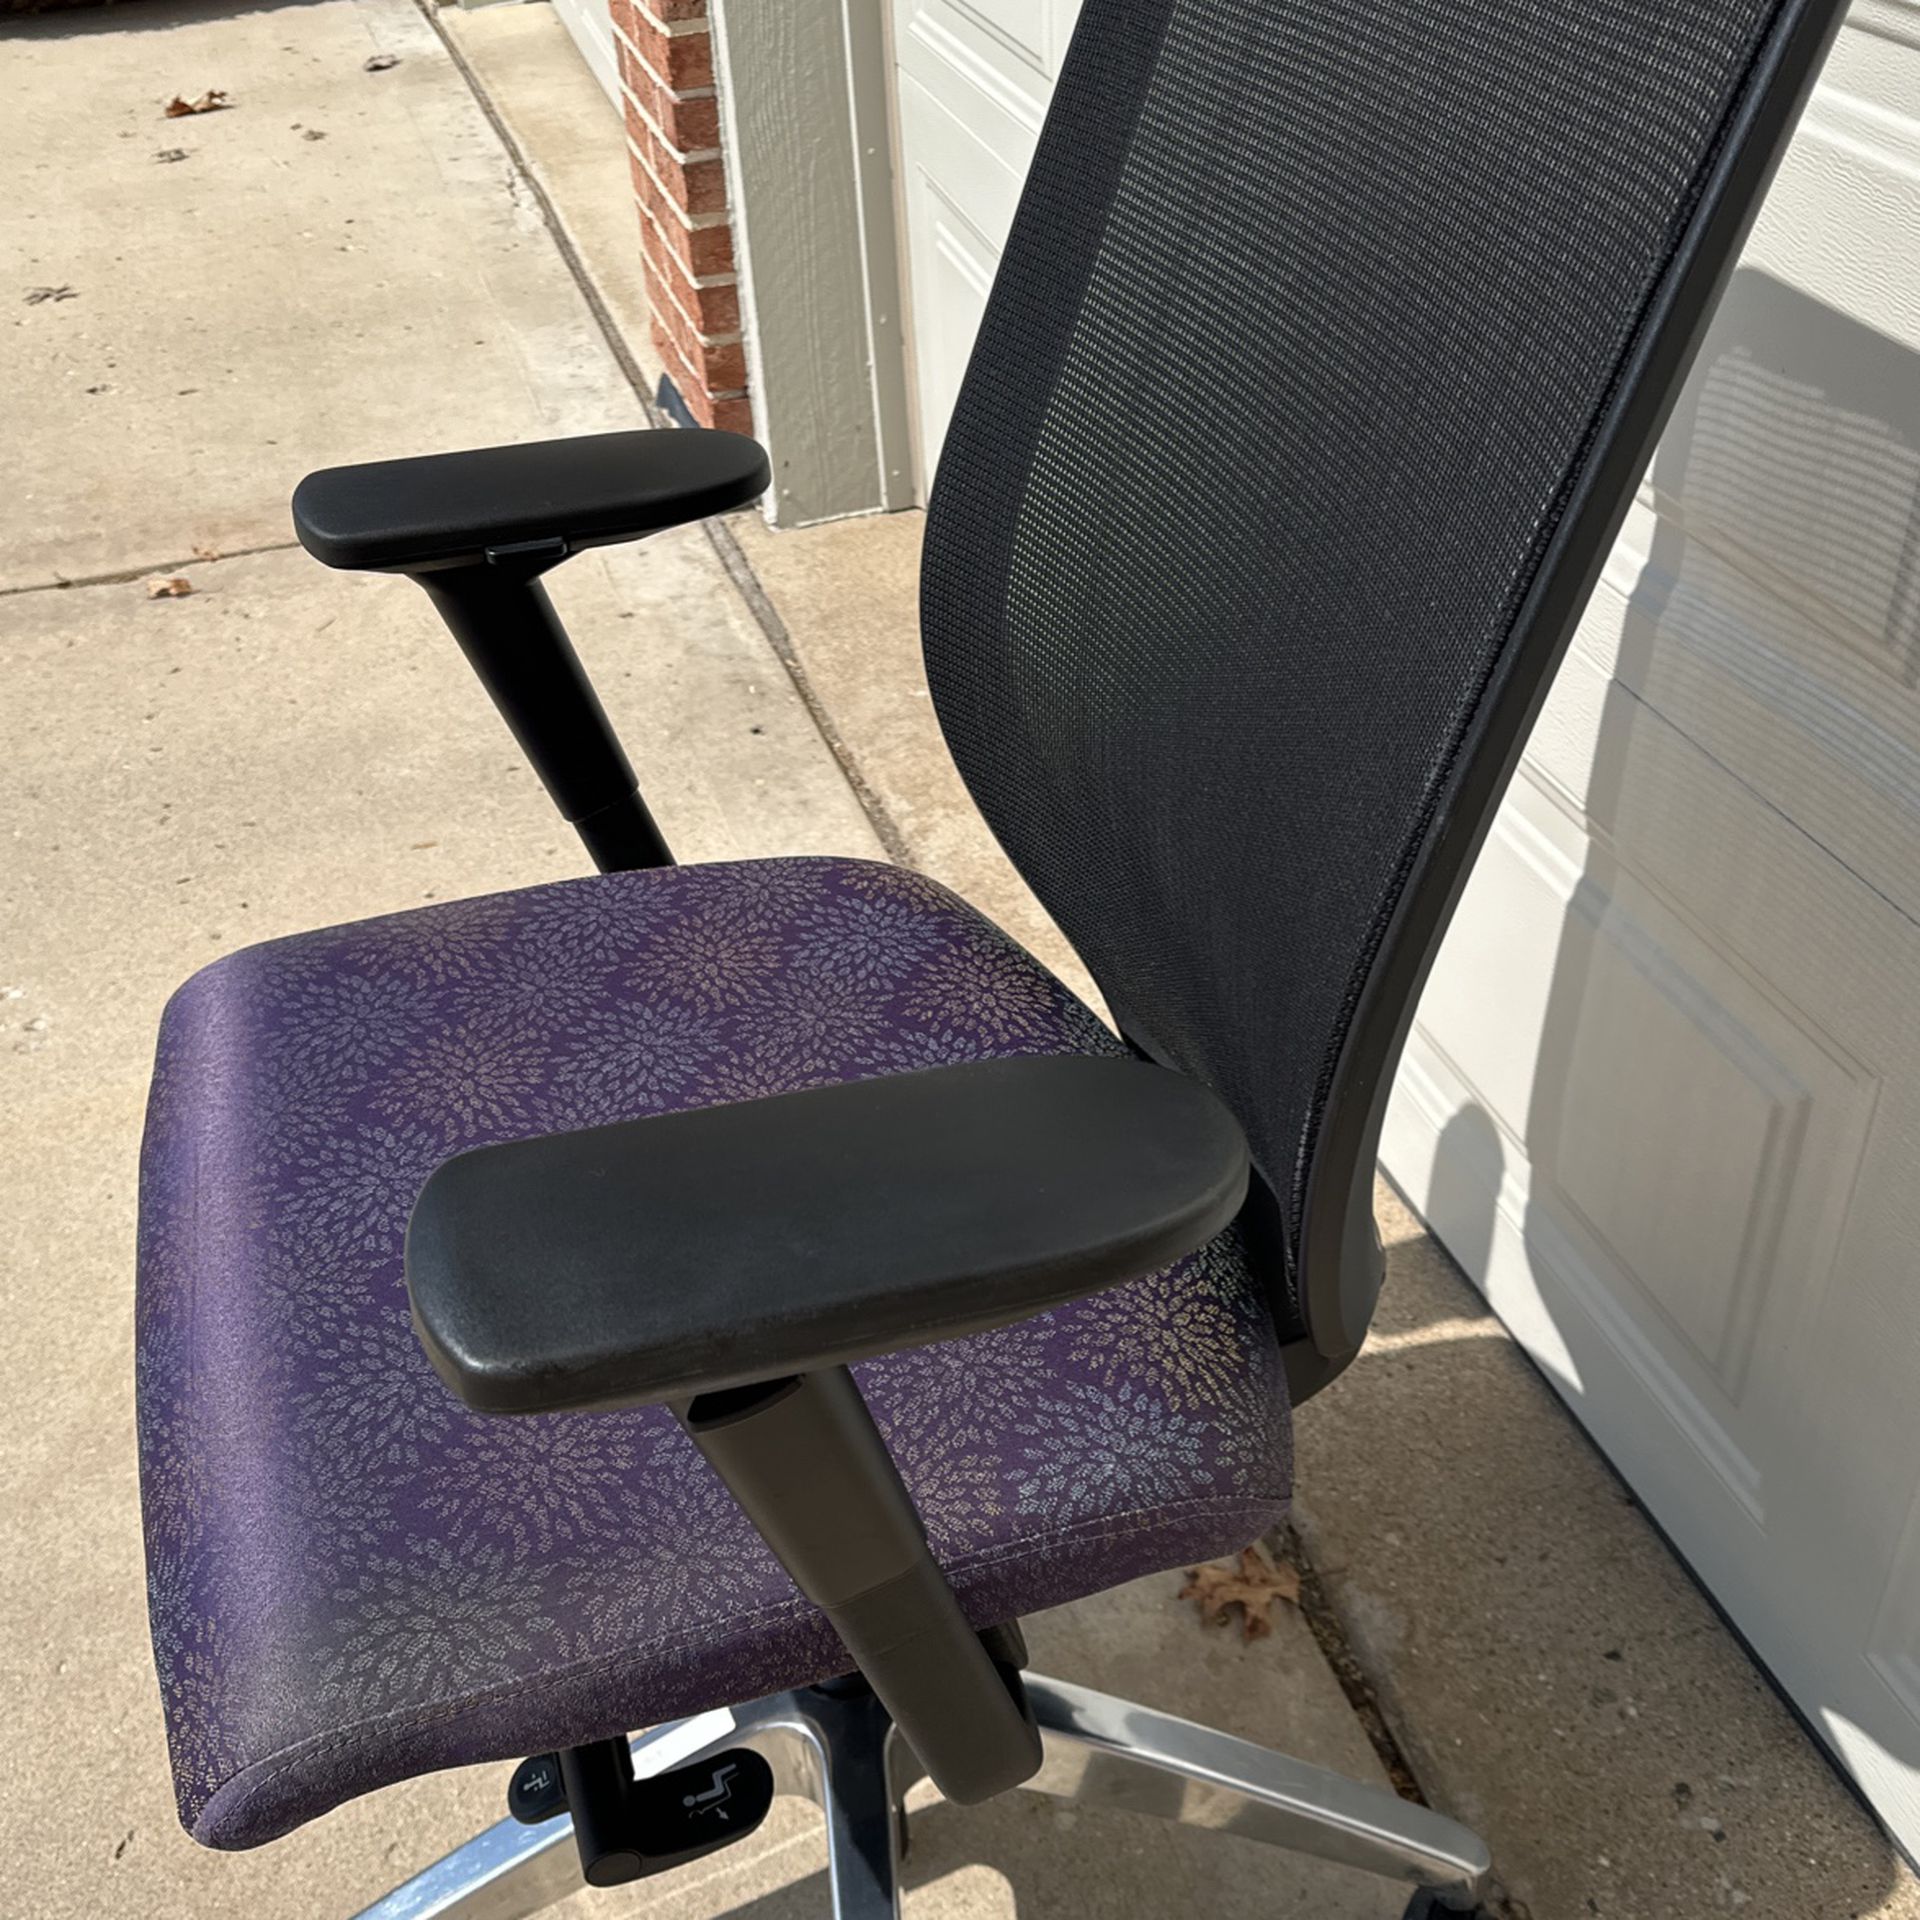 Desk chair with wheels